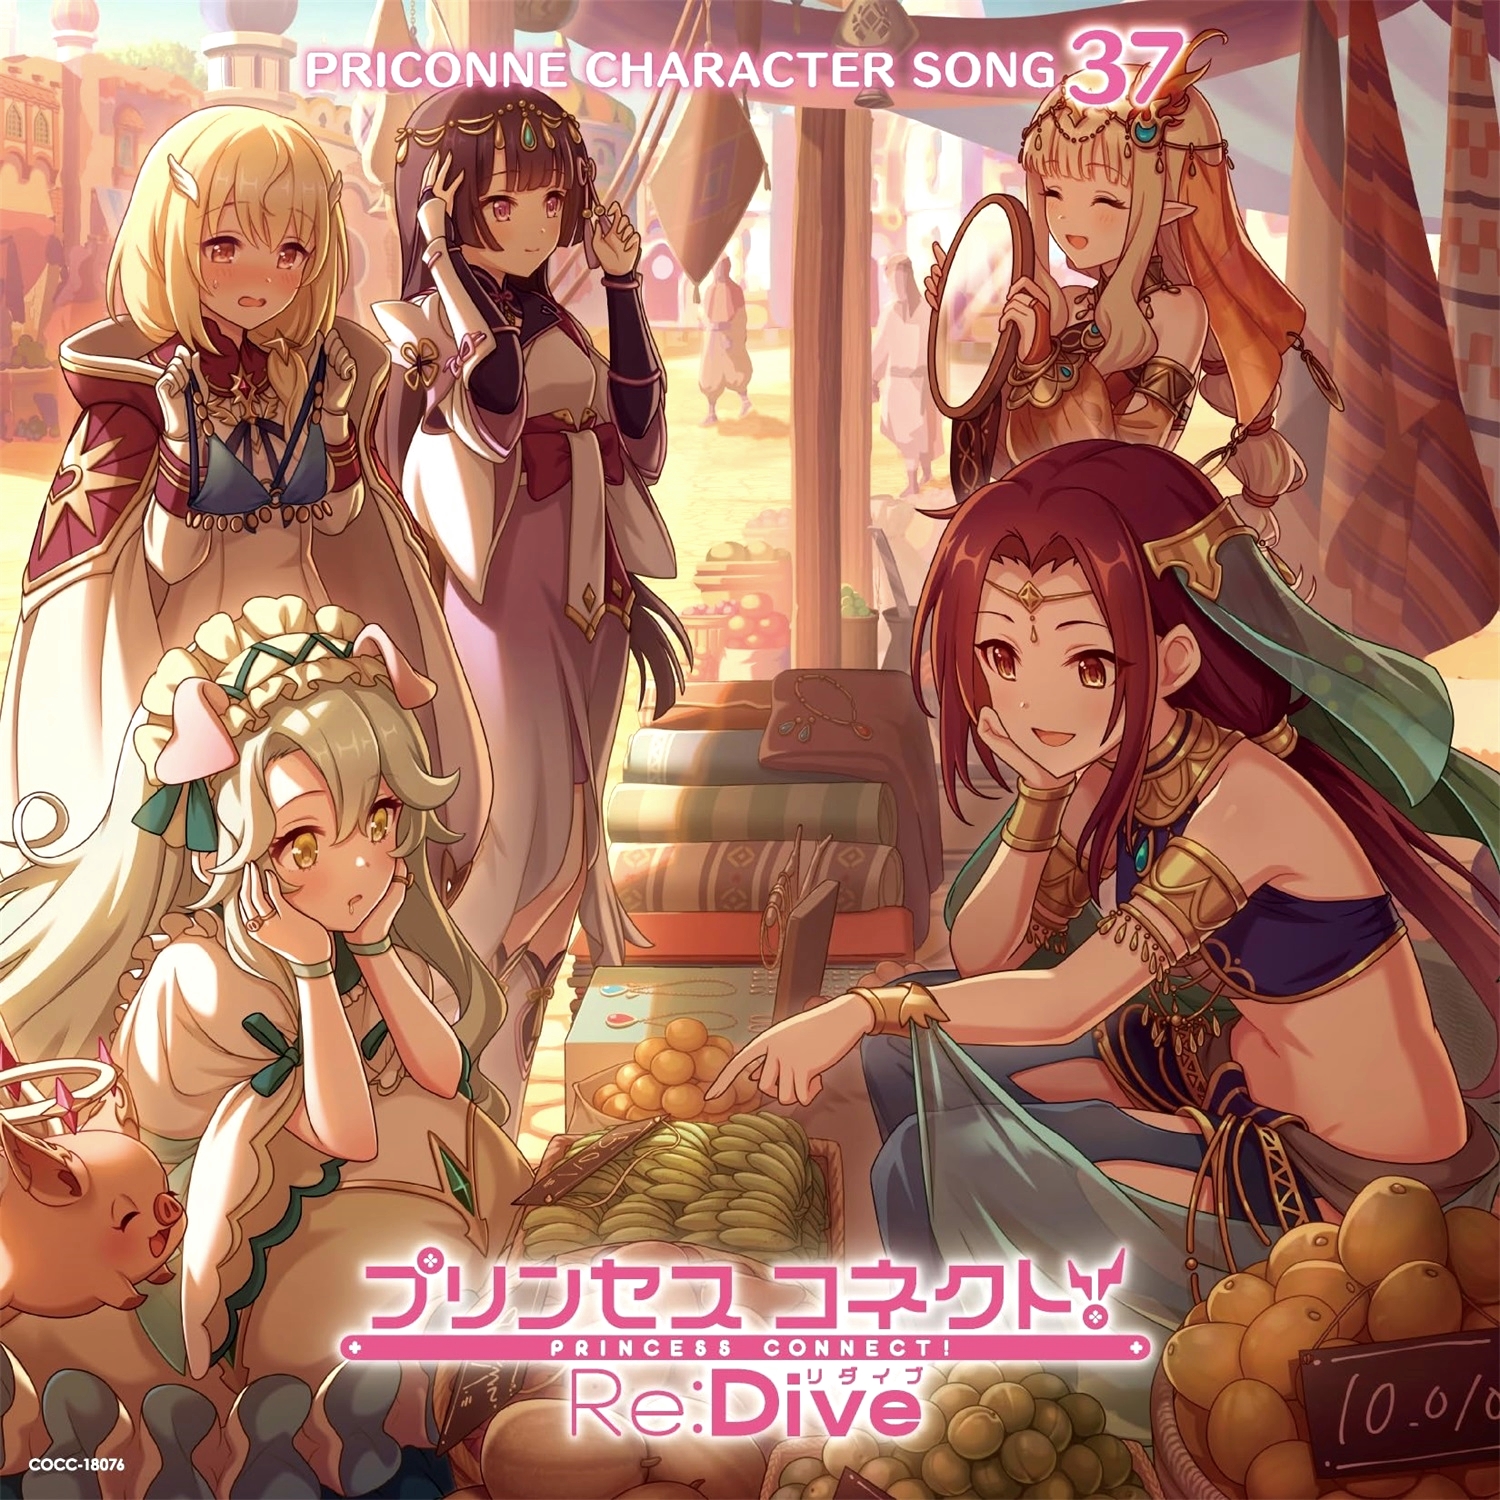 【WAV】ゲーム「プリンセスコネクト! ReDive PRINCESS CONNECT! 」Priconne Character Song 37／Cygames